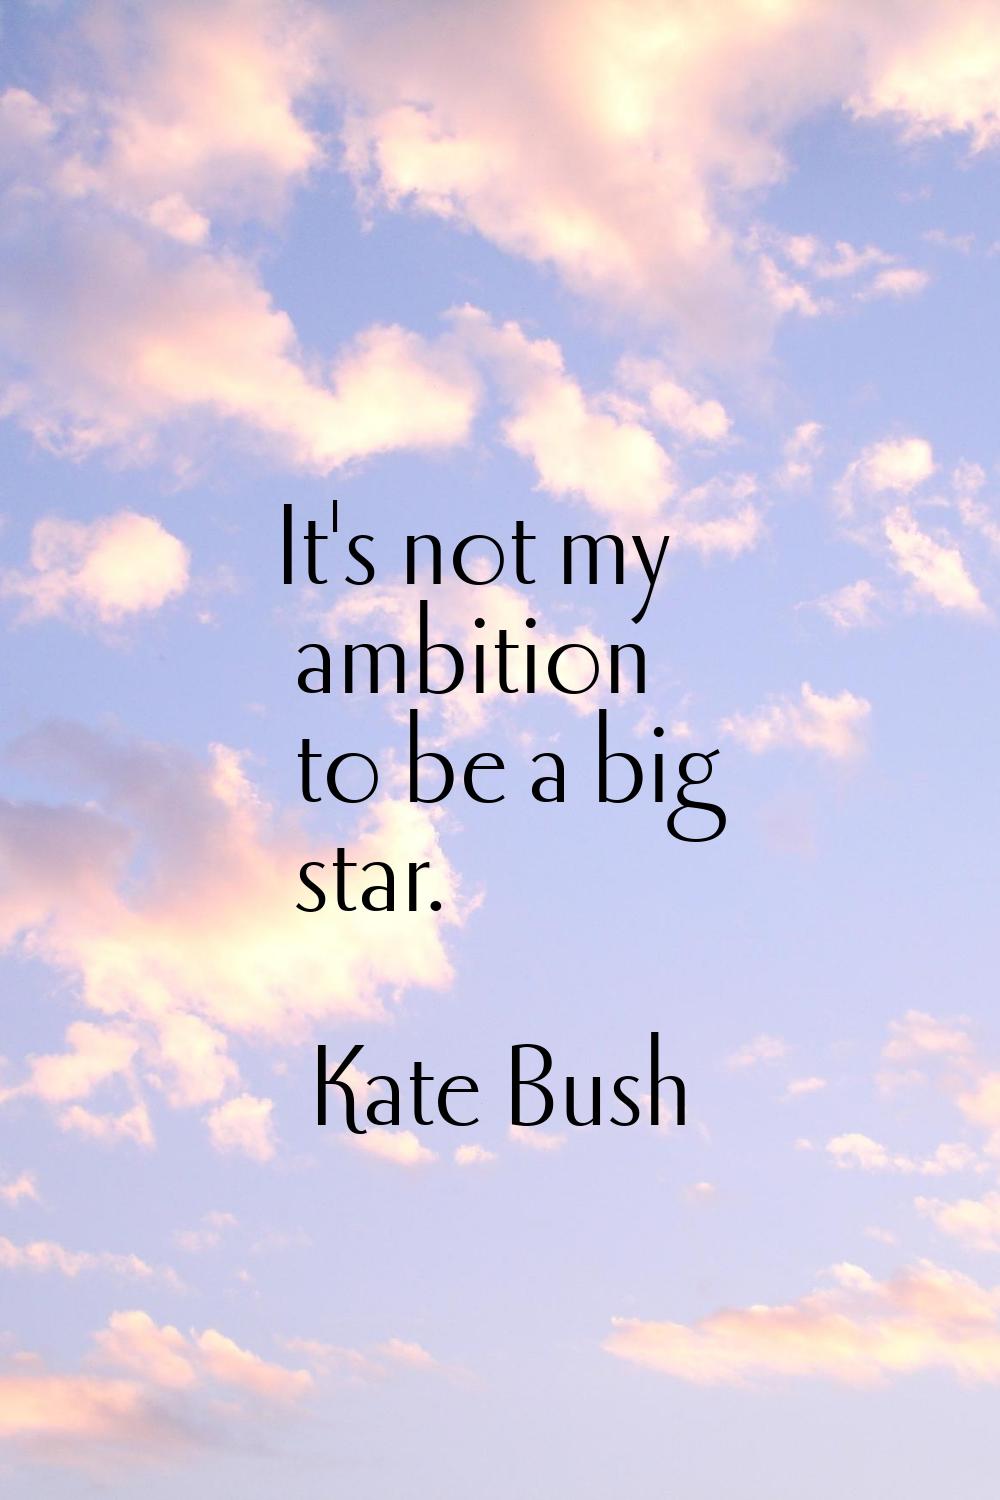 It's not my ambition to be a big star.